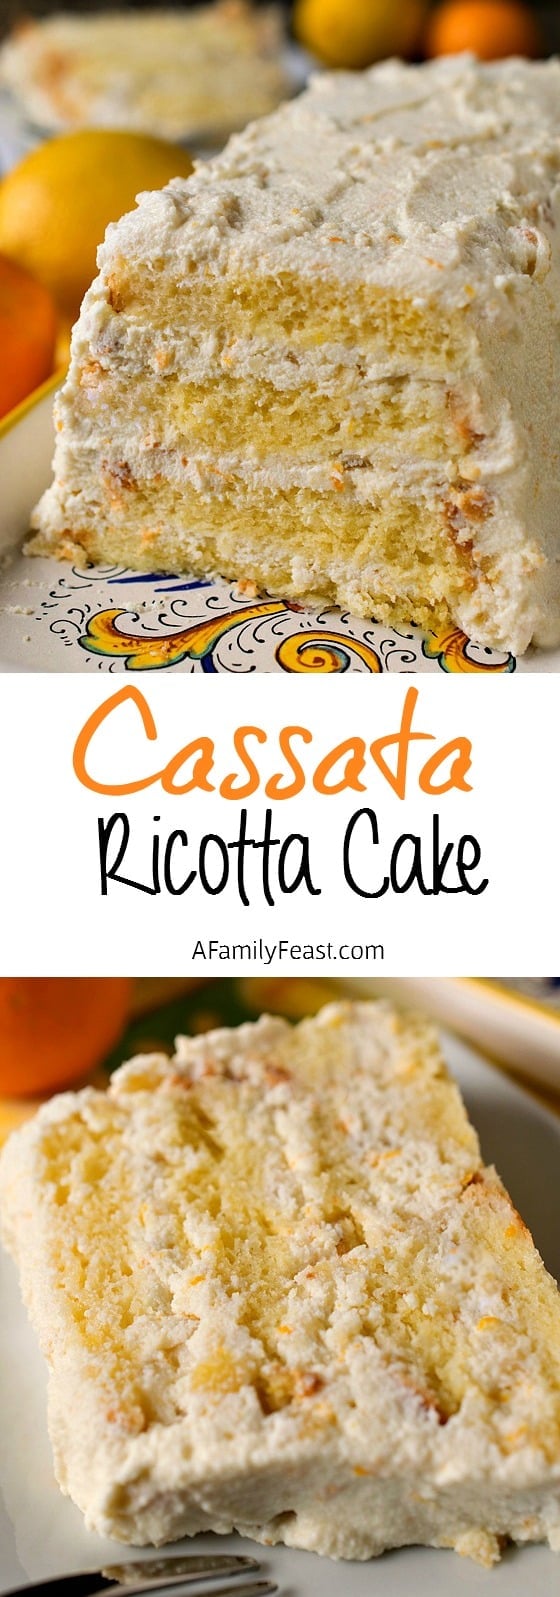 Cassata Ricotta (Sponge Cake with Ricotta) - A lighter version of the classic Italian dessert!  Simple to make and very delicious!